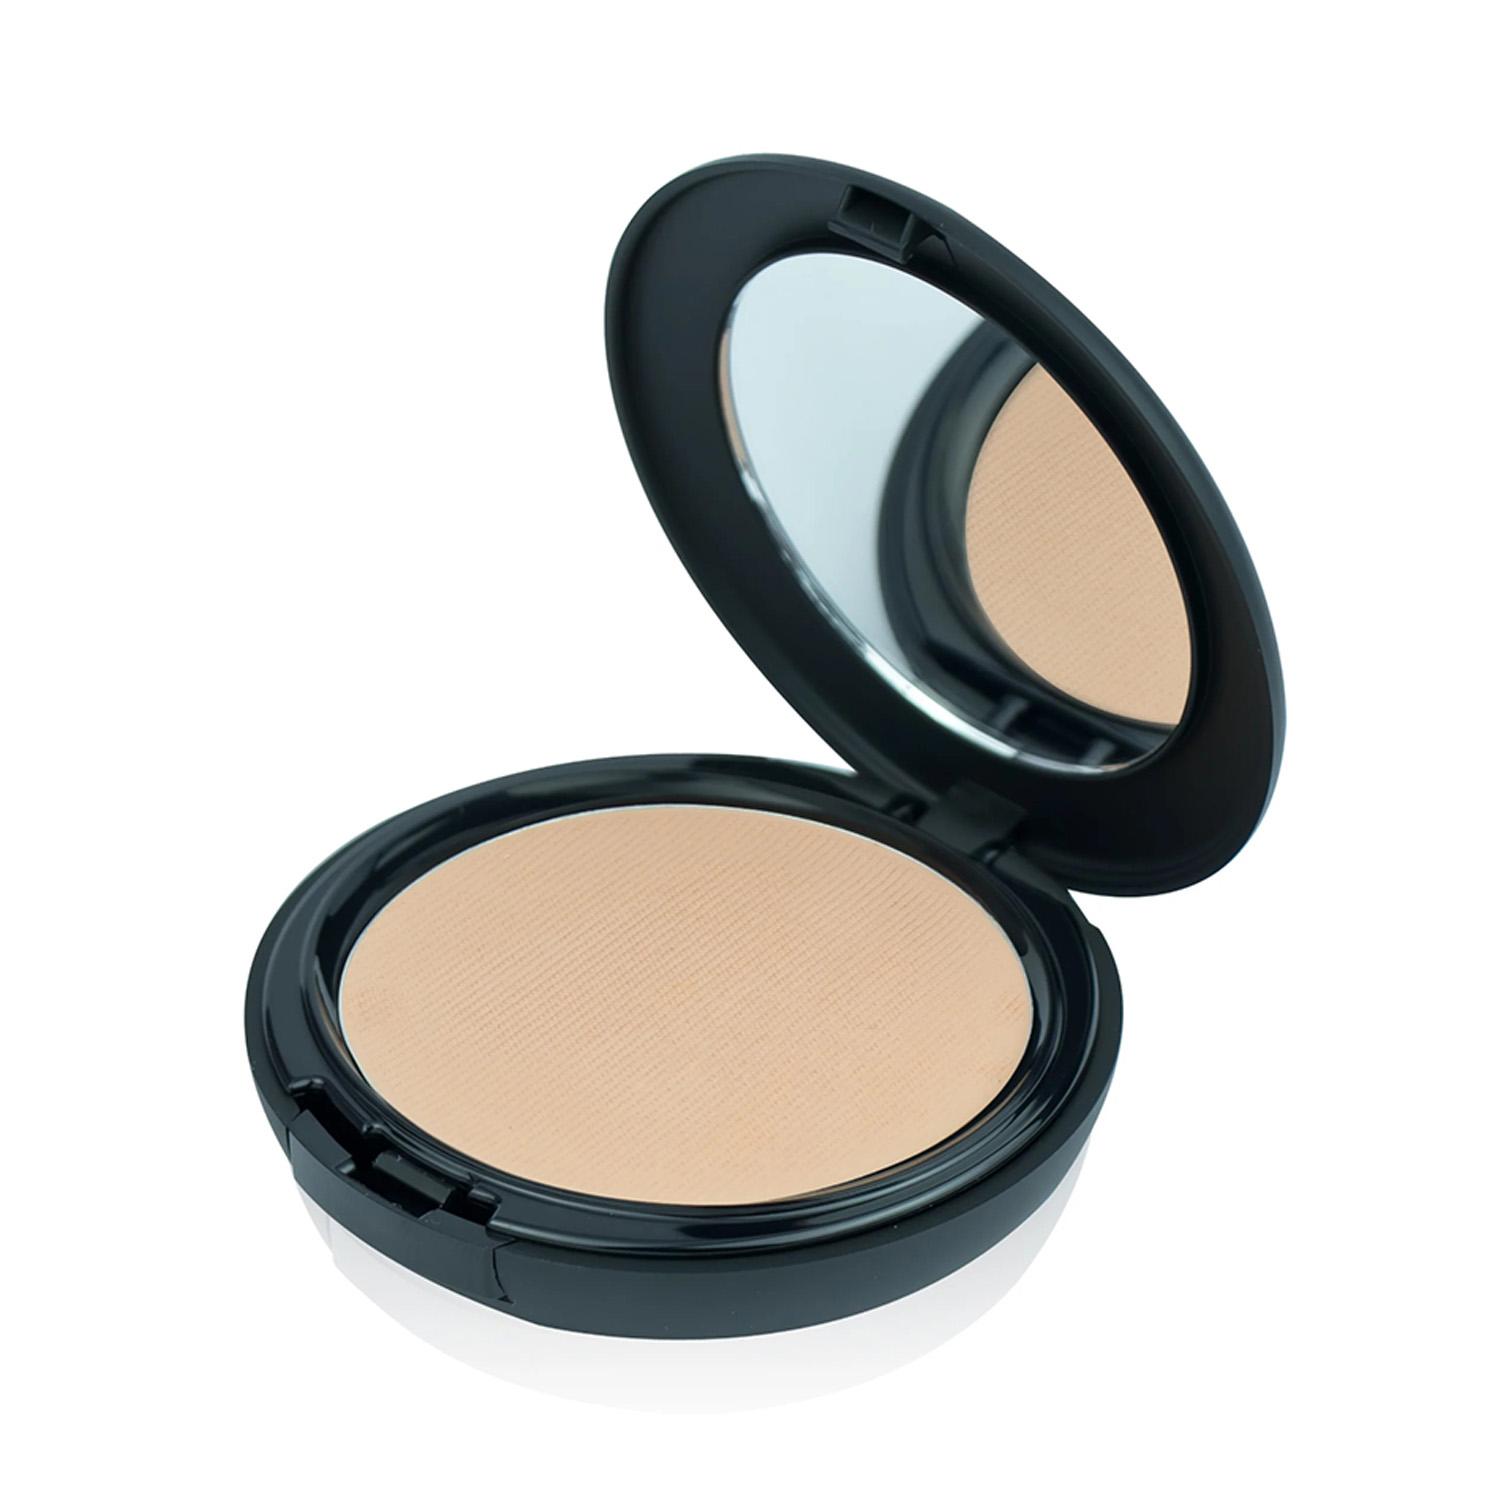 Faces Canada | Faces Canada Ultime Pro Expert Cover - Natural, Non Oily Matte Look, Evens Out Complexion (9 g)